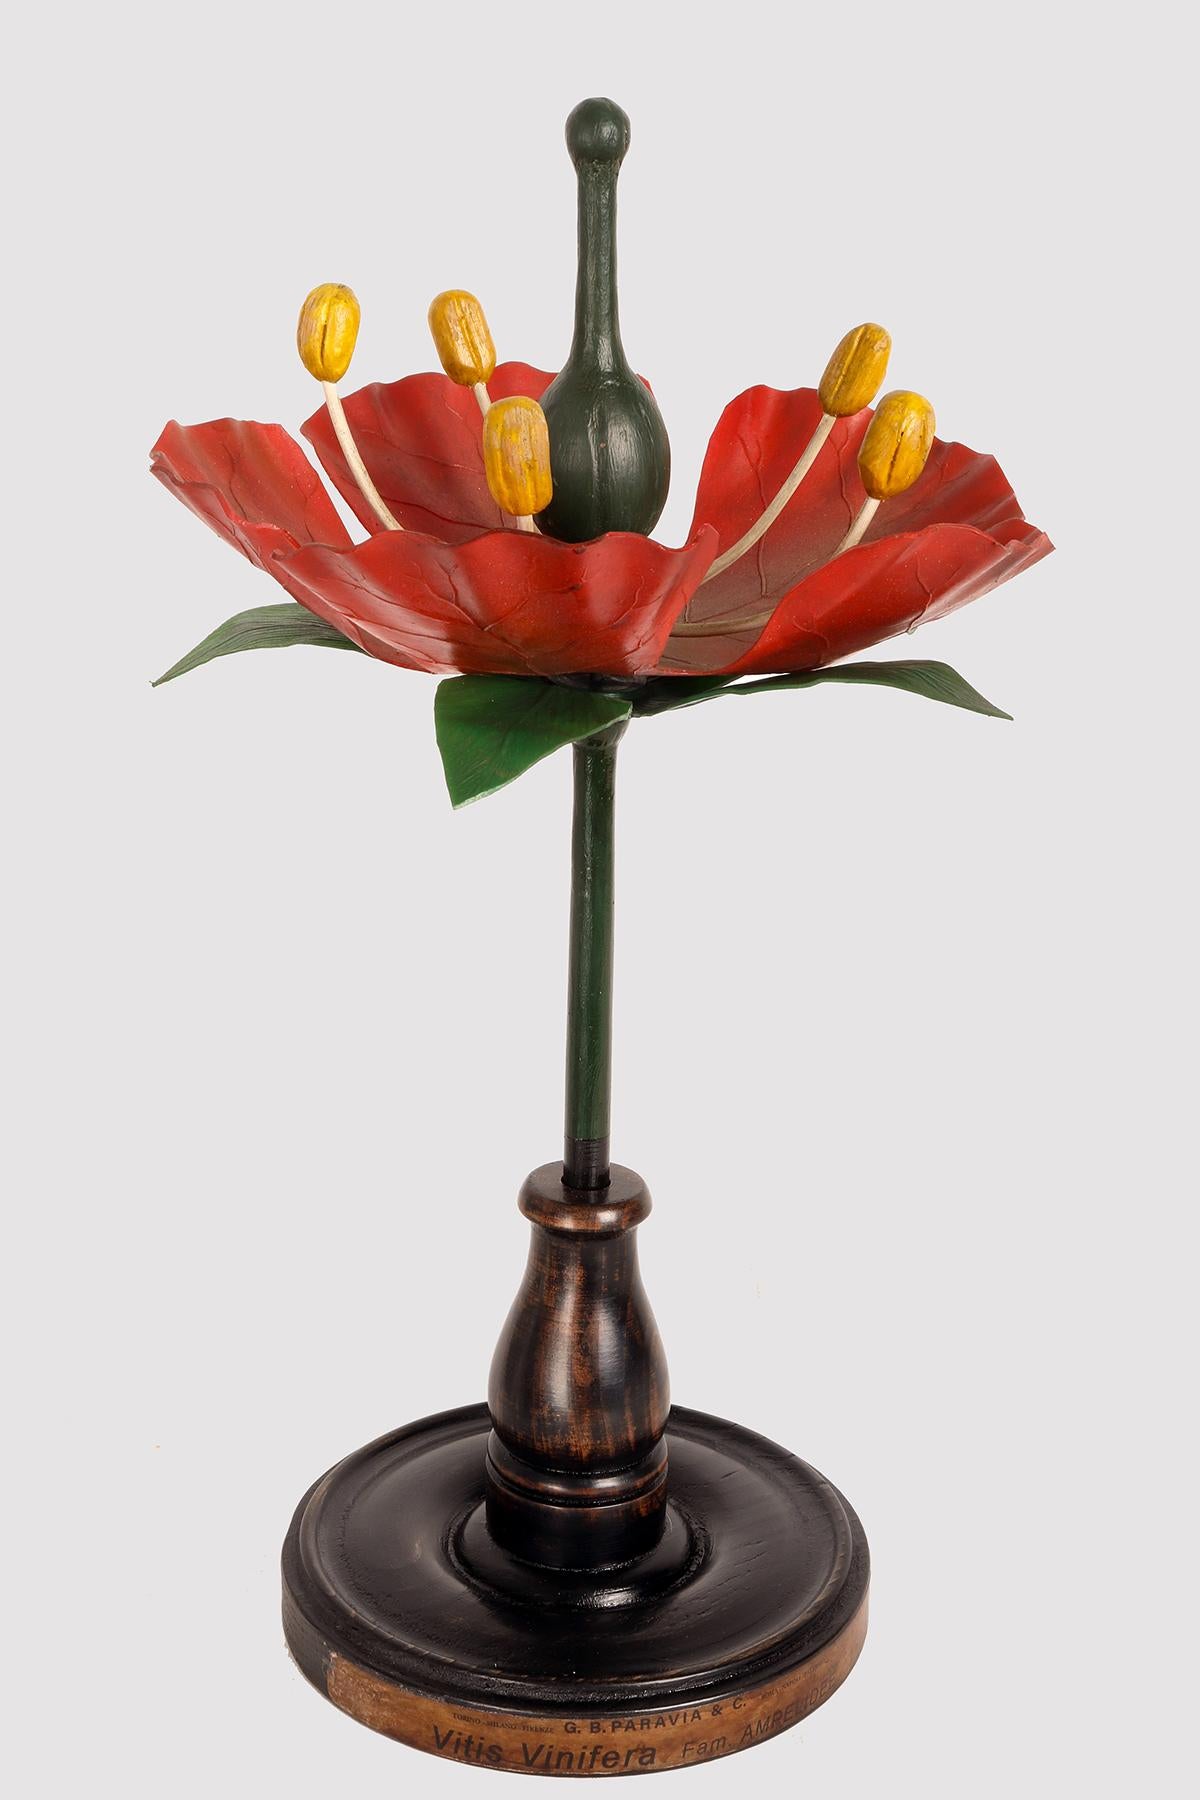 A botanical maquette for didactic use, depicting a red Grape flower, Vitis Vinifera, Anipelidee. Made of metal, paper, plaster, galalith and wood. Extremely detailed. Paravia, Milan, Italy circa 1940.